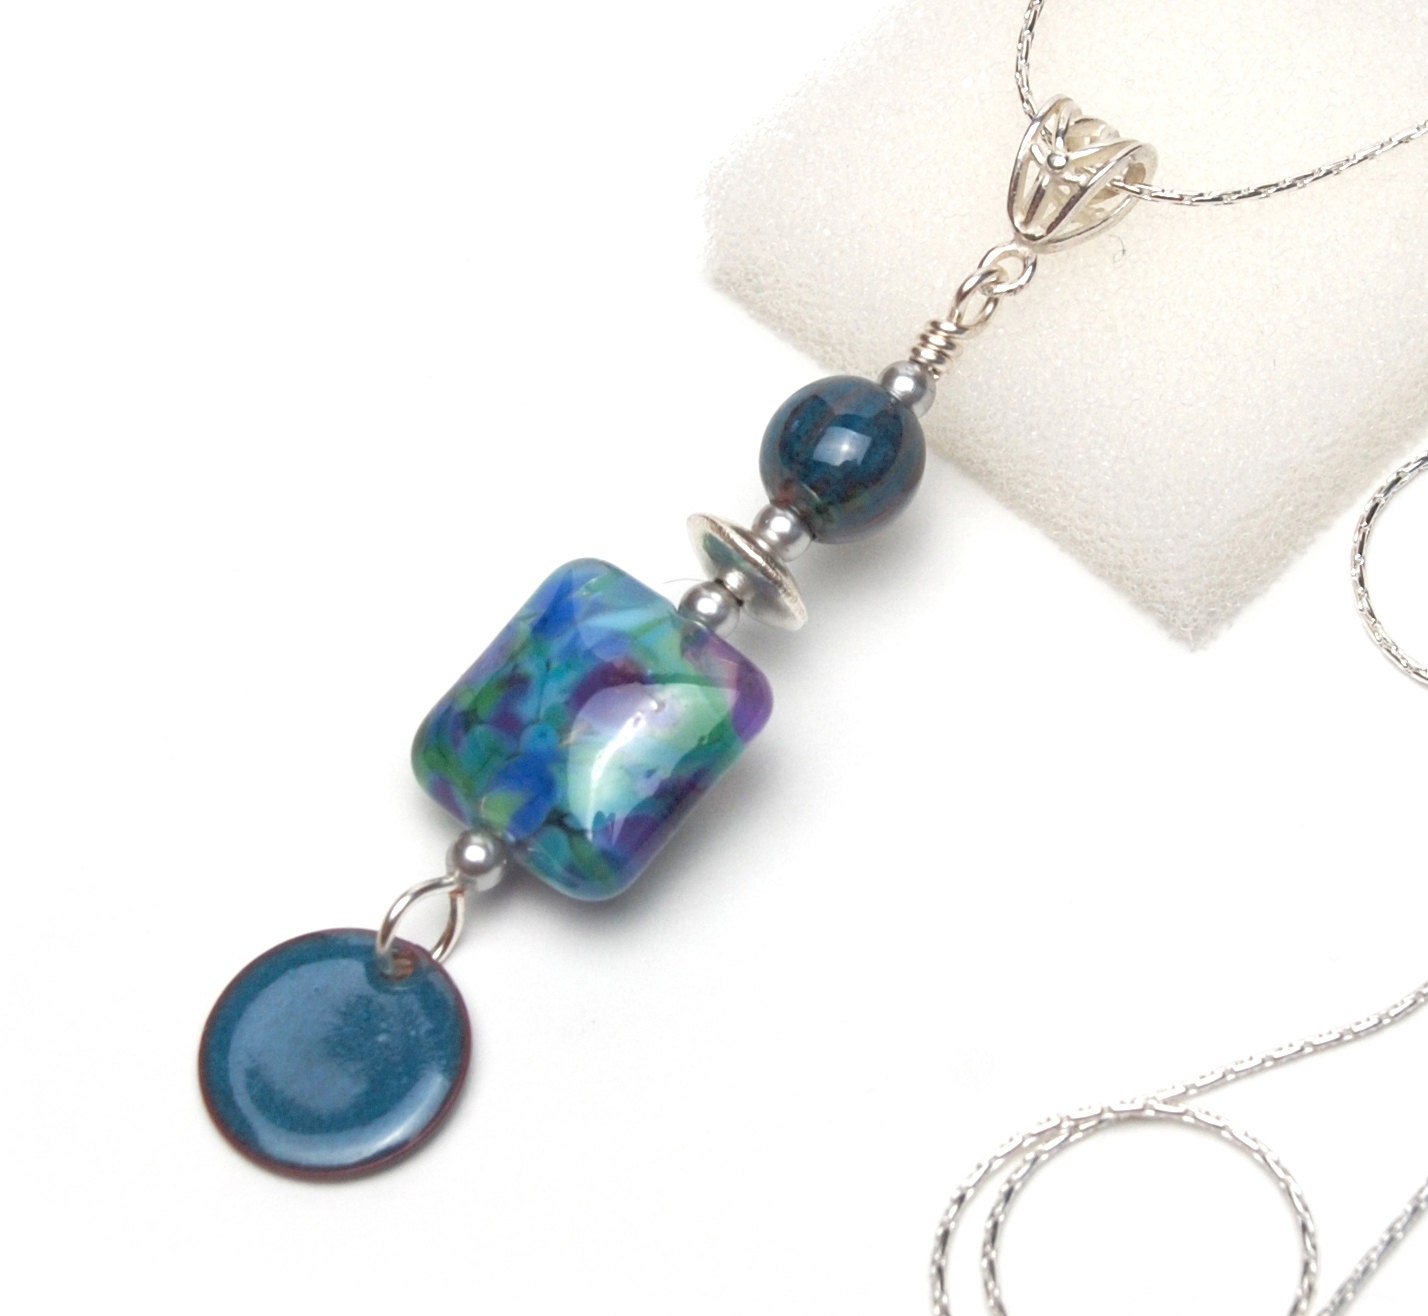 Blue Green and Violet Pendant Necklace - Artisan Lampwork Glass and Enameled Beads on Silver Plated Chain - lilicharms